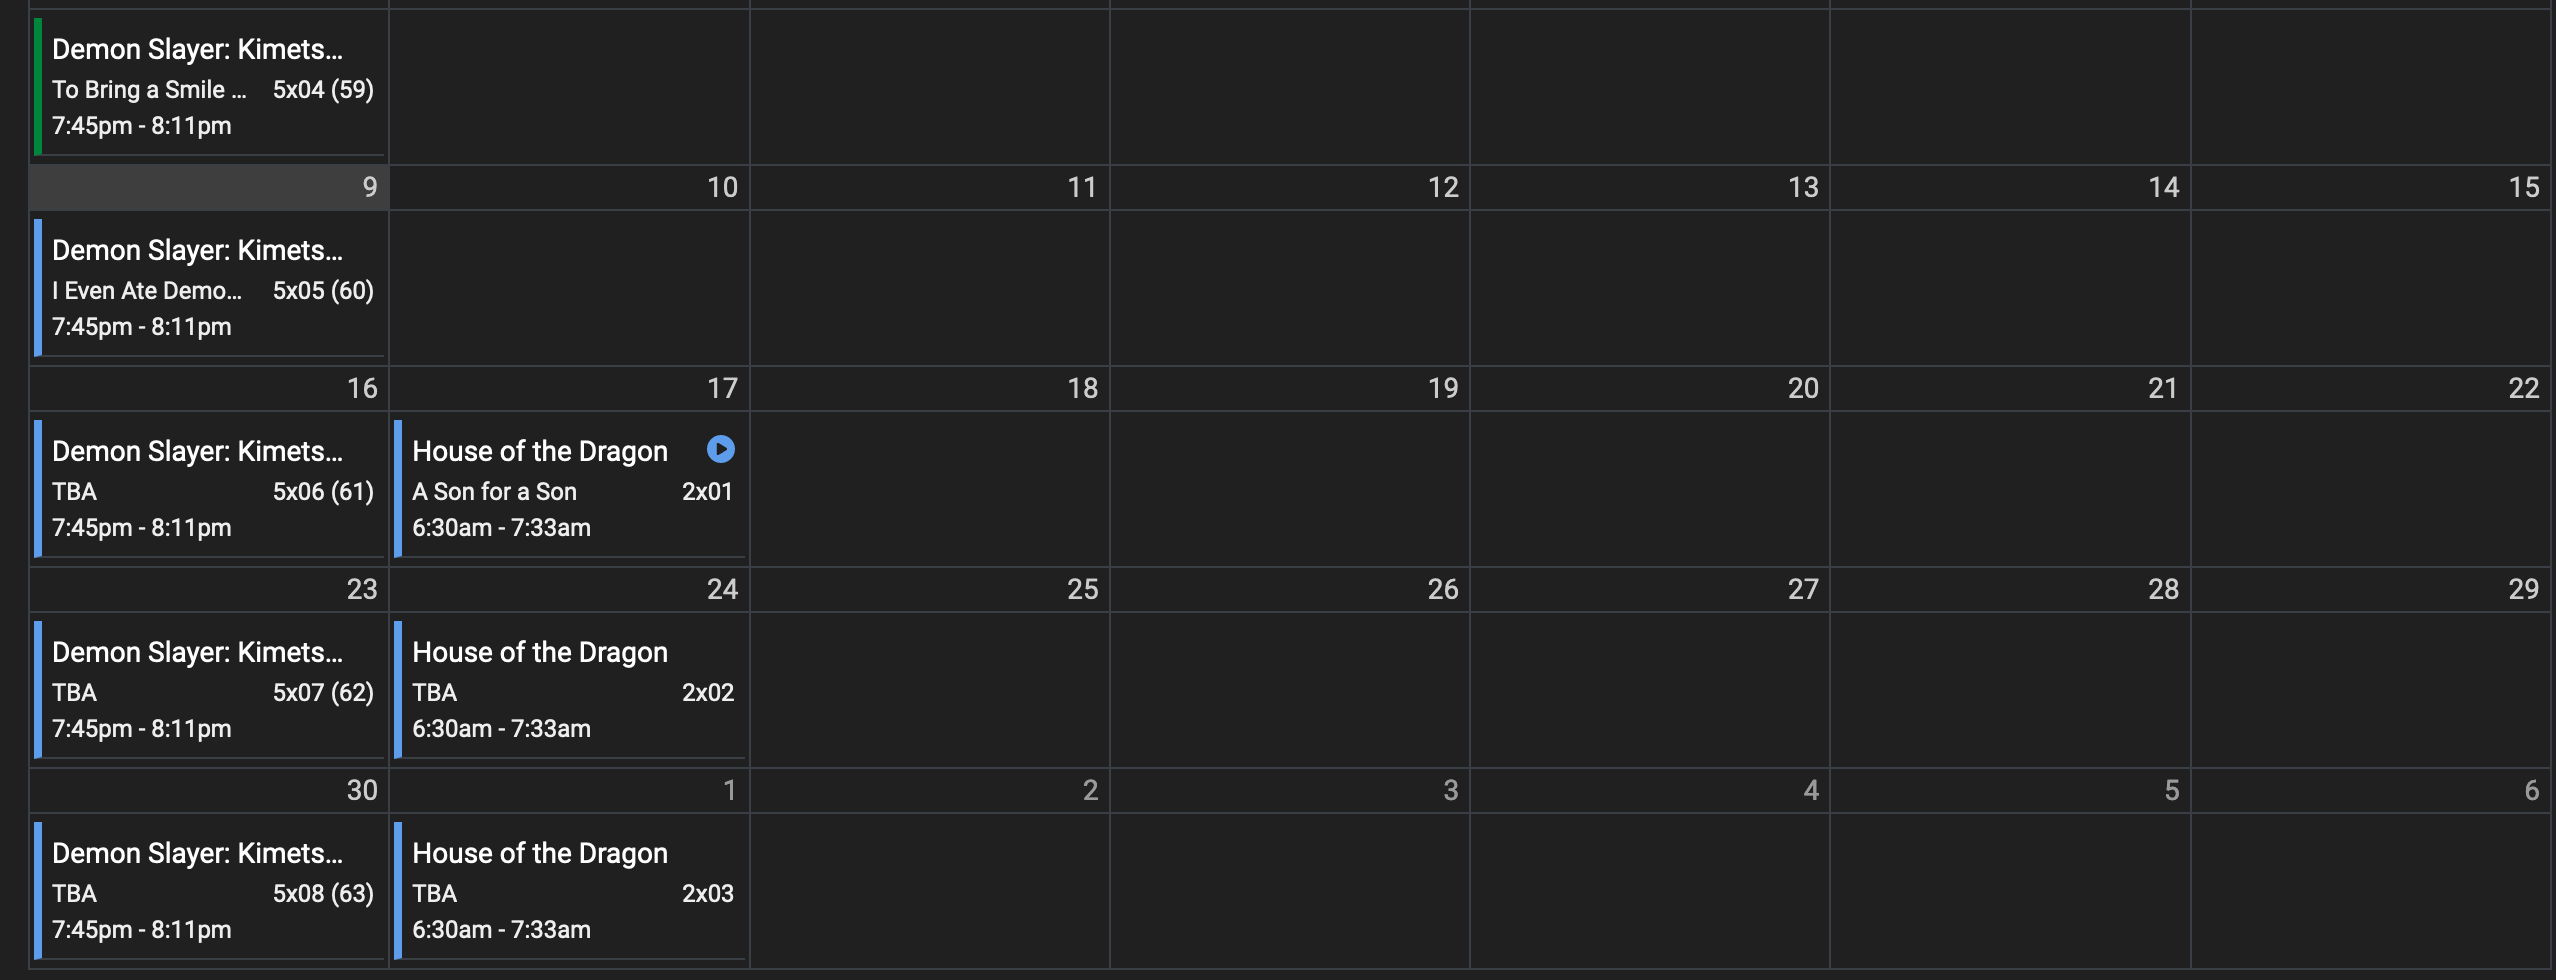 Calendar view in Sonarr showing the upcoming TV shows / Animes